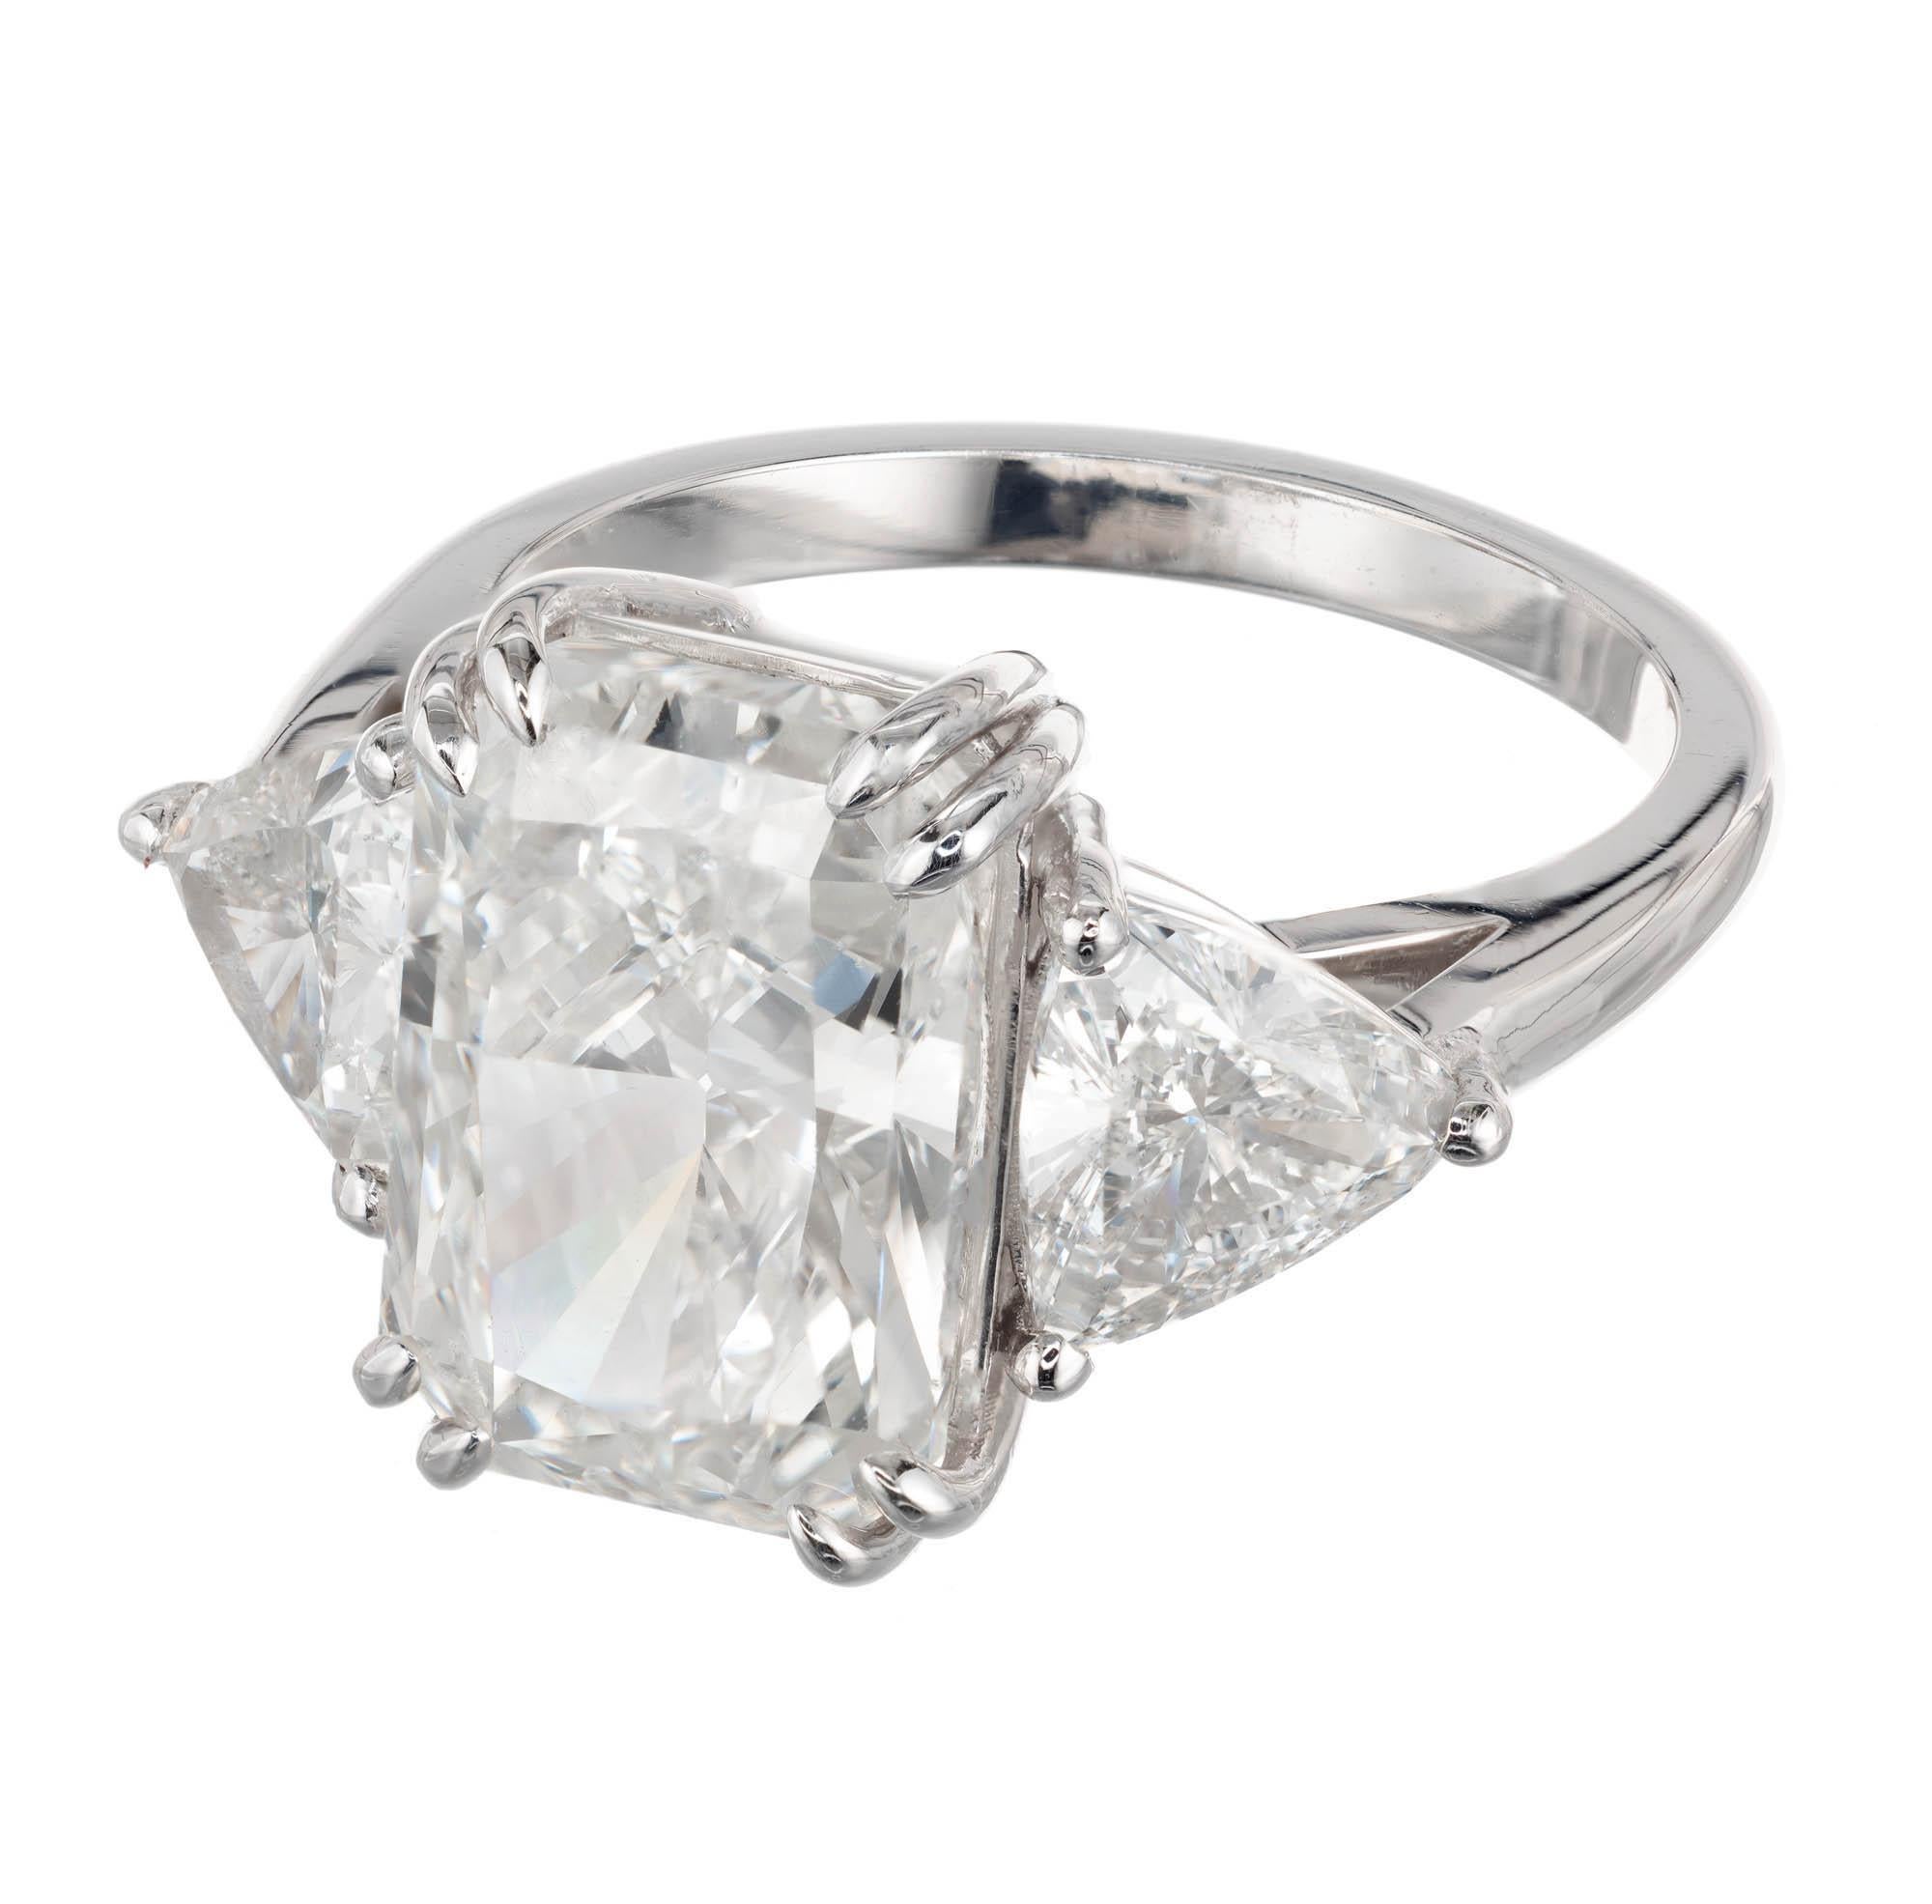 Peter Suchy three-stone diamond engagement ring. 4.99 carat rectangular radiant cut diamond with two well matched with trilliant cut diamonds. The platinum setting was designed and crafted in the Peter Suchy Workshop. 

1 rectangular brilliant cut J